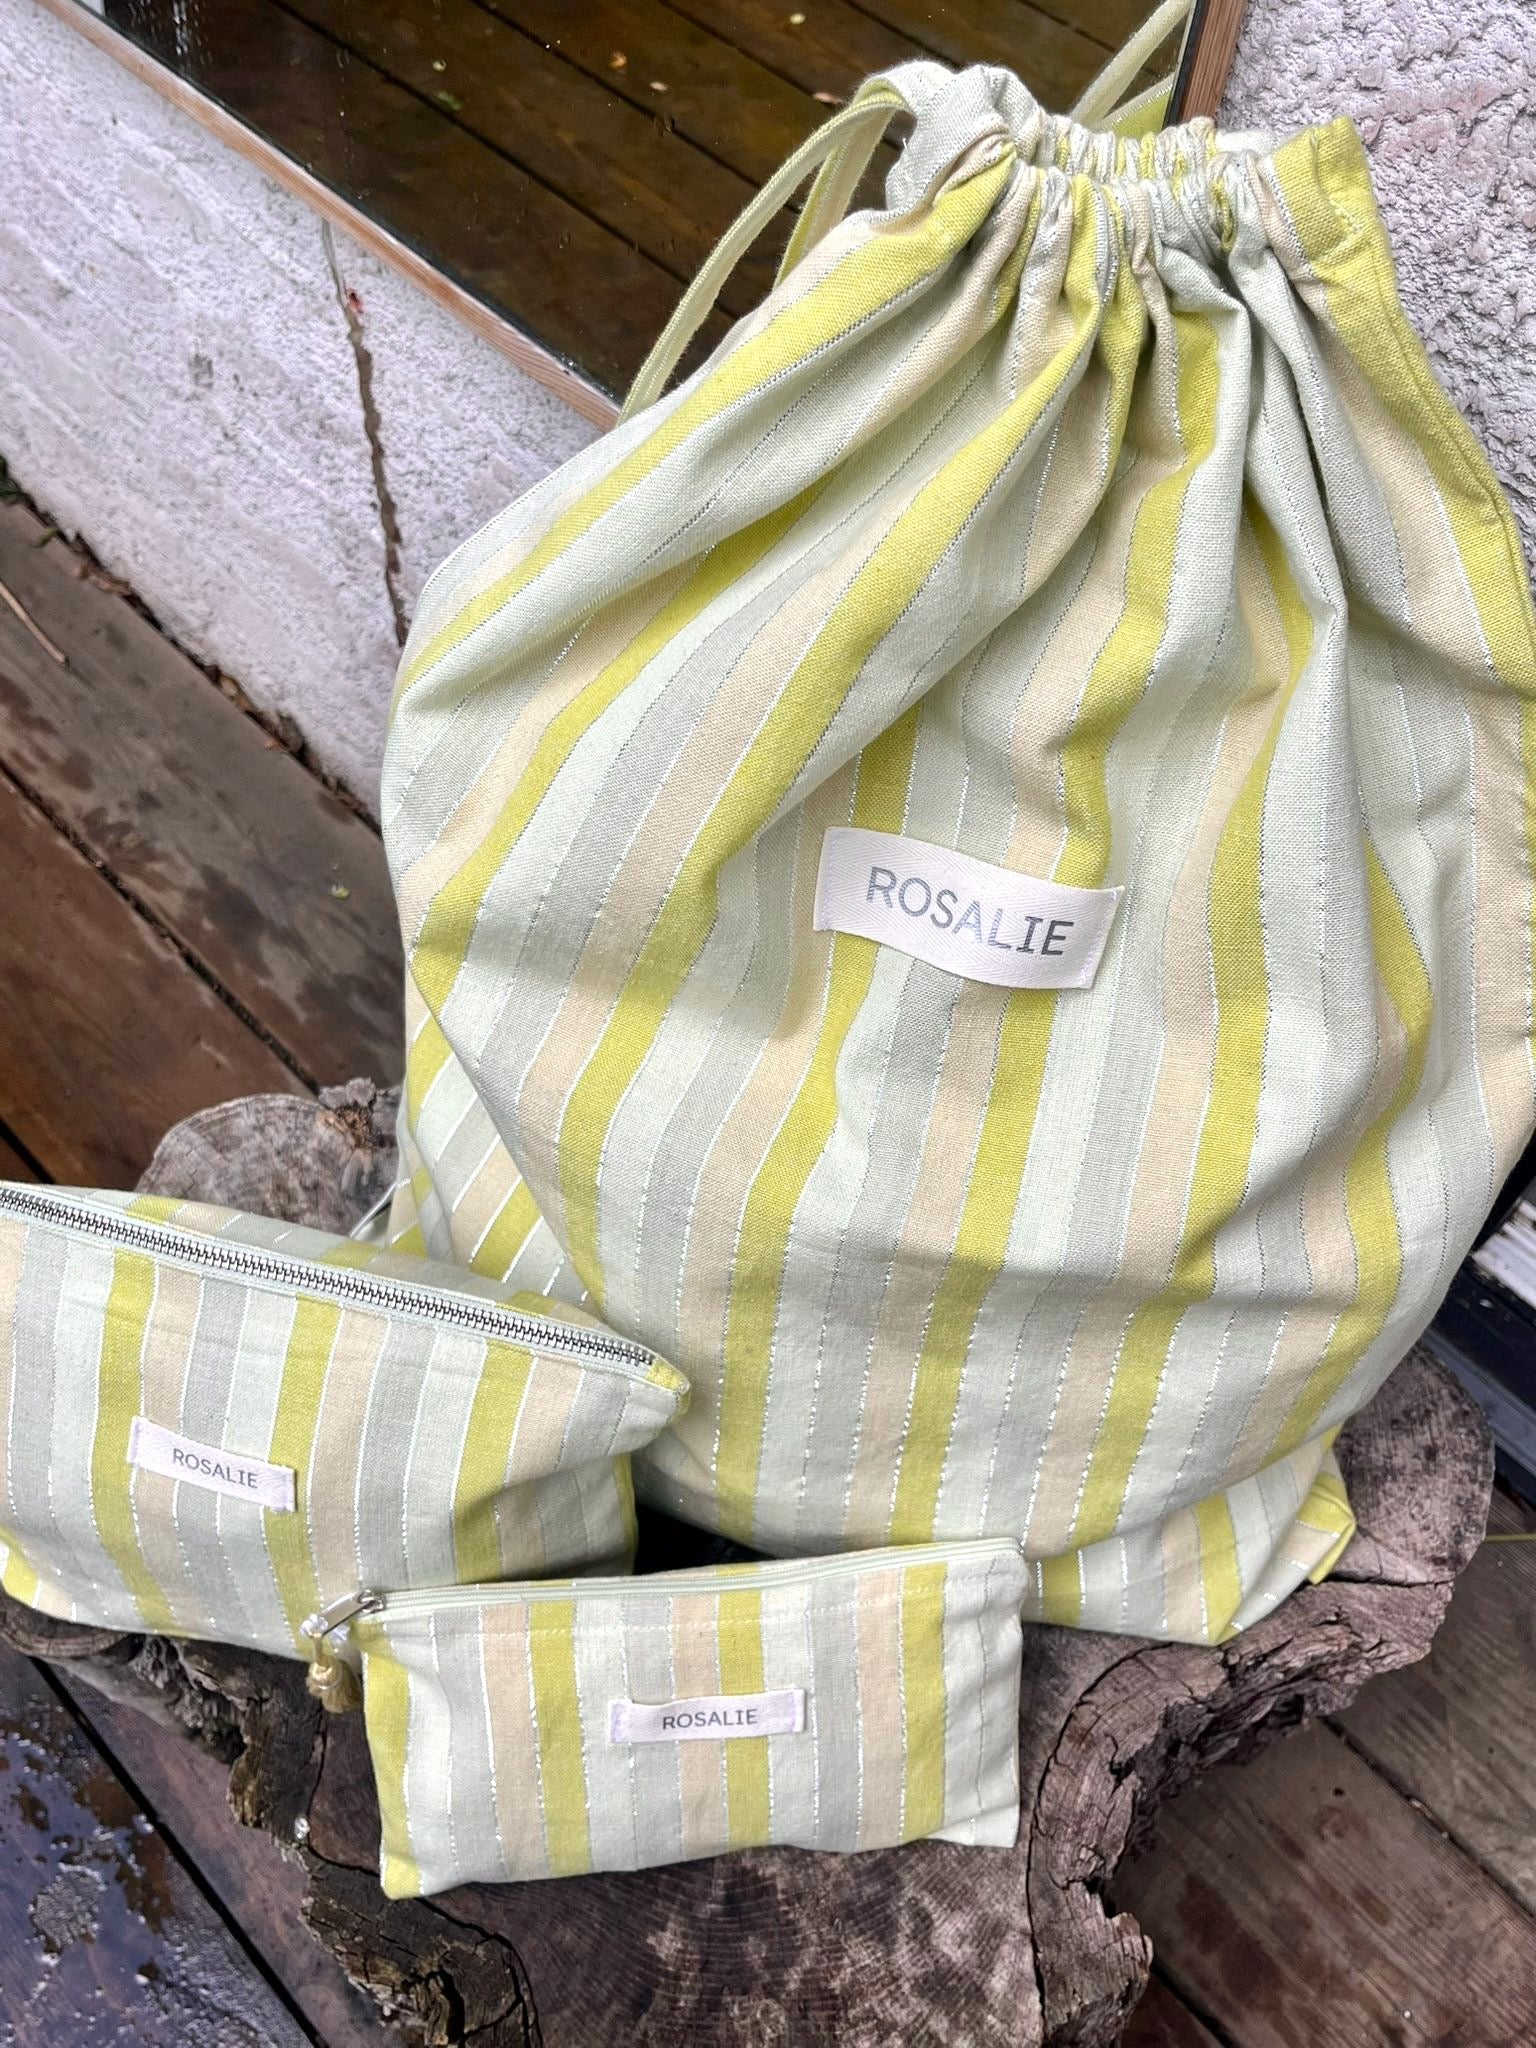 APRIL GIFT IDEA: SET Laundrybag+Toiletrybag+Pouch = customization FOR FREE